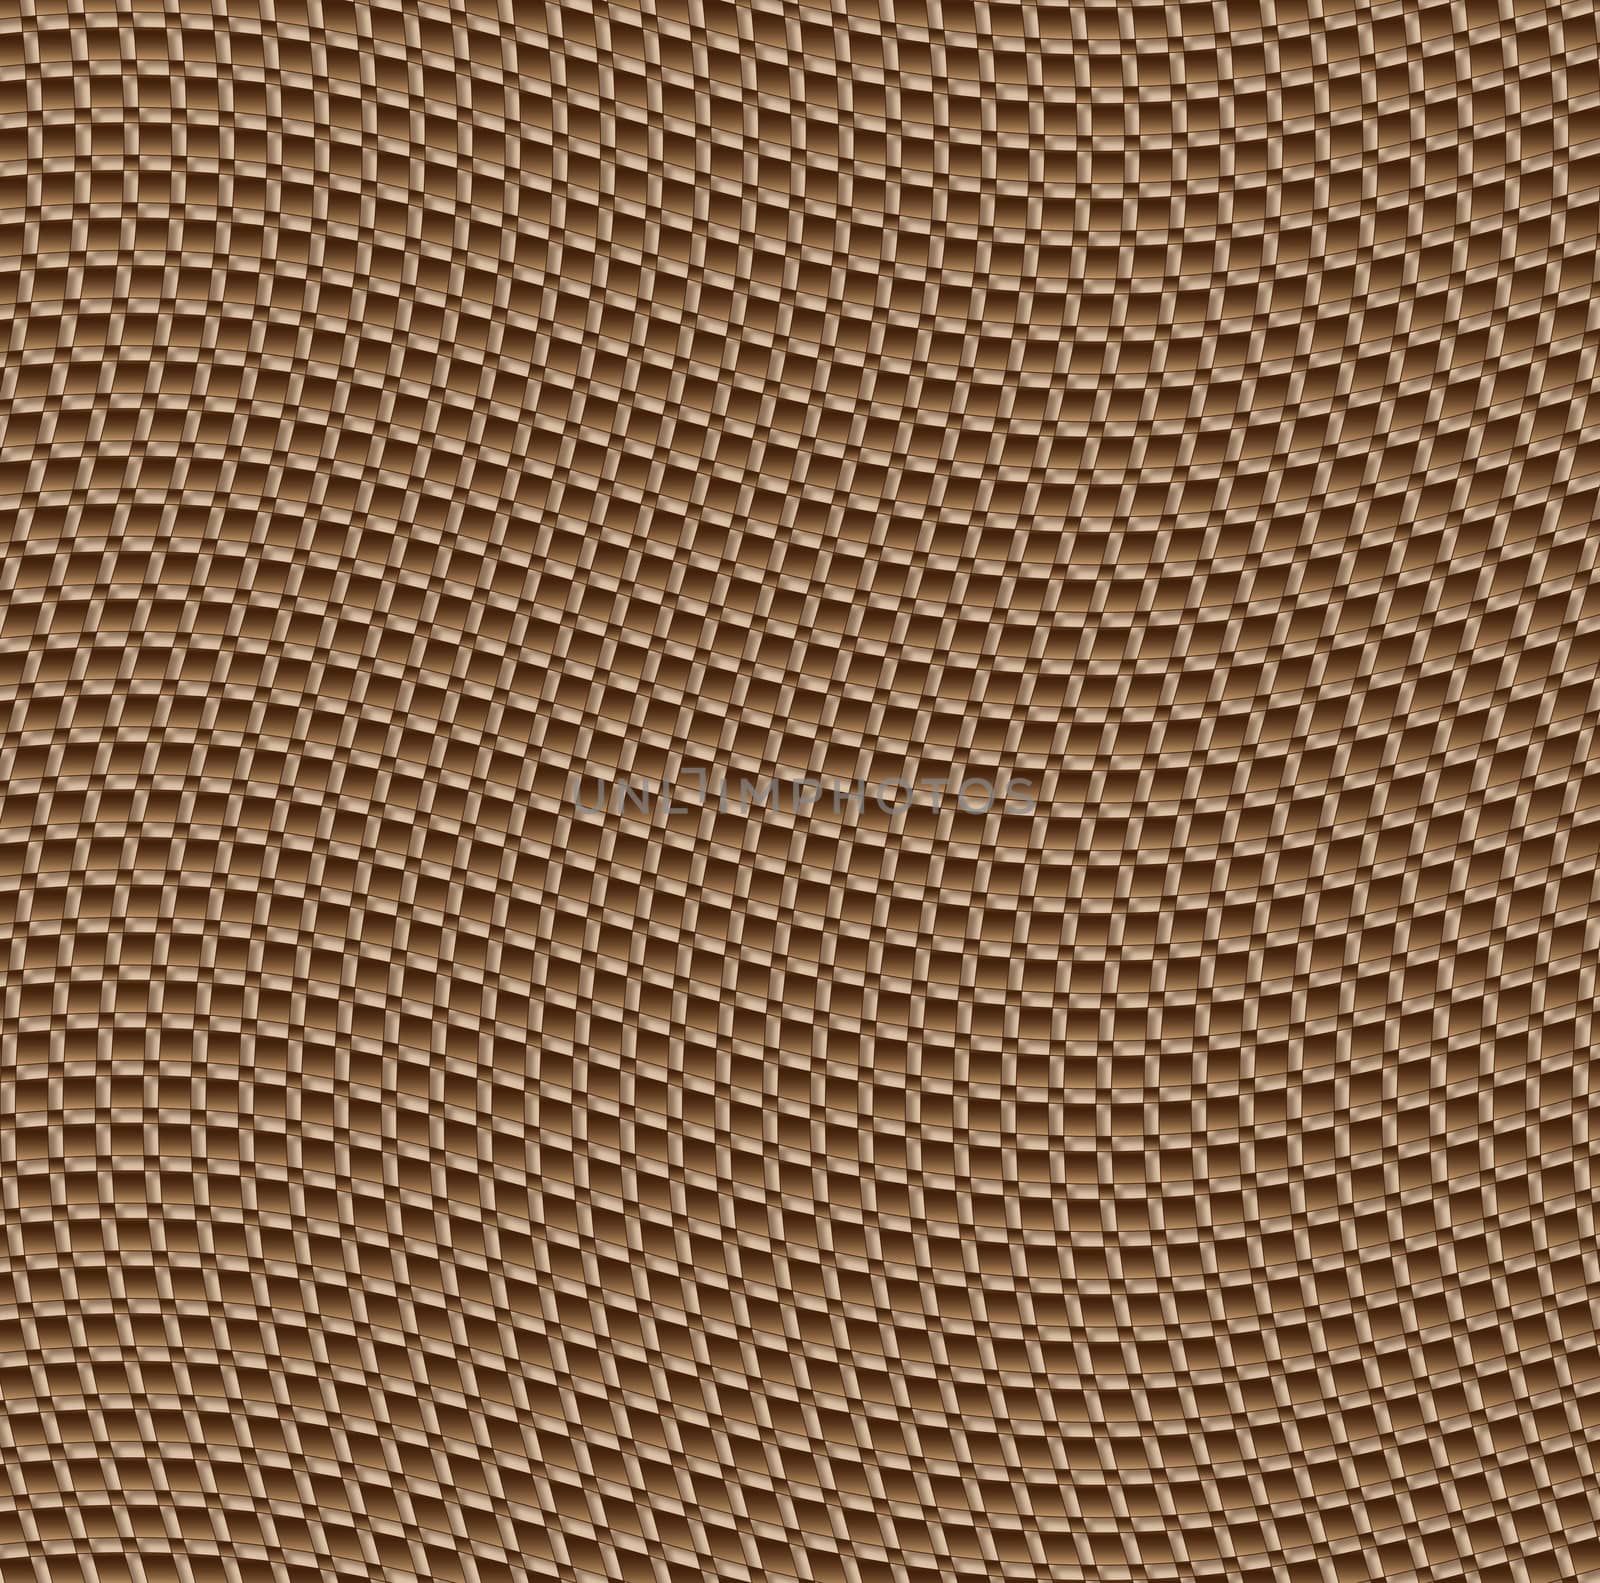 background or texture chocolate brown color grid